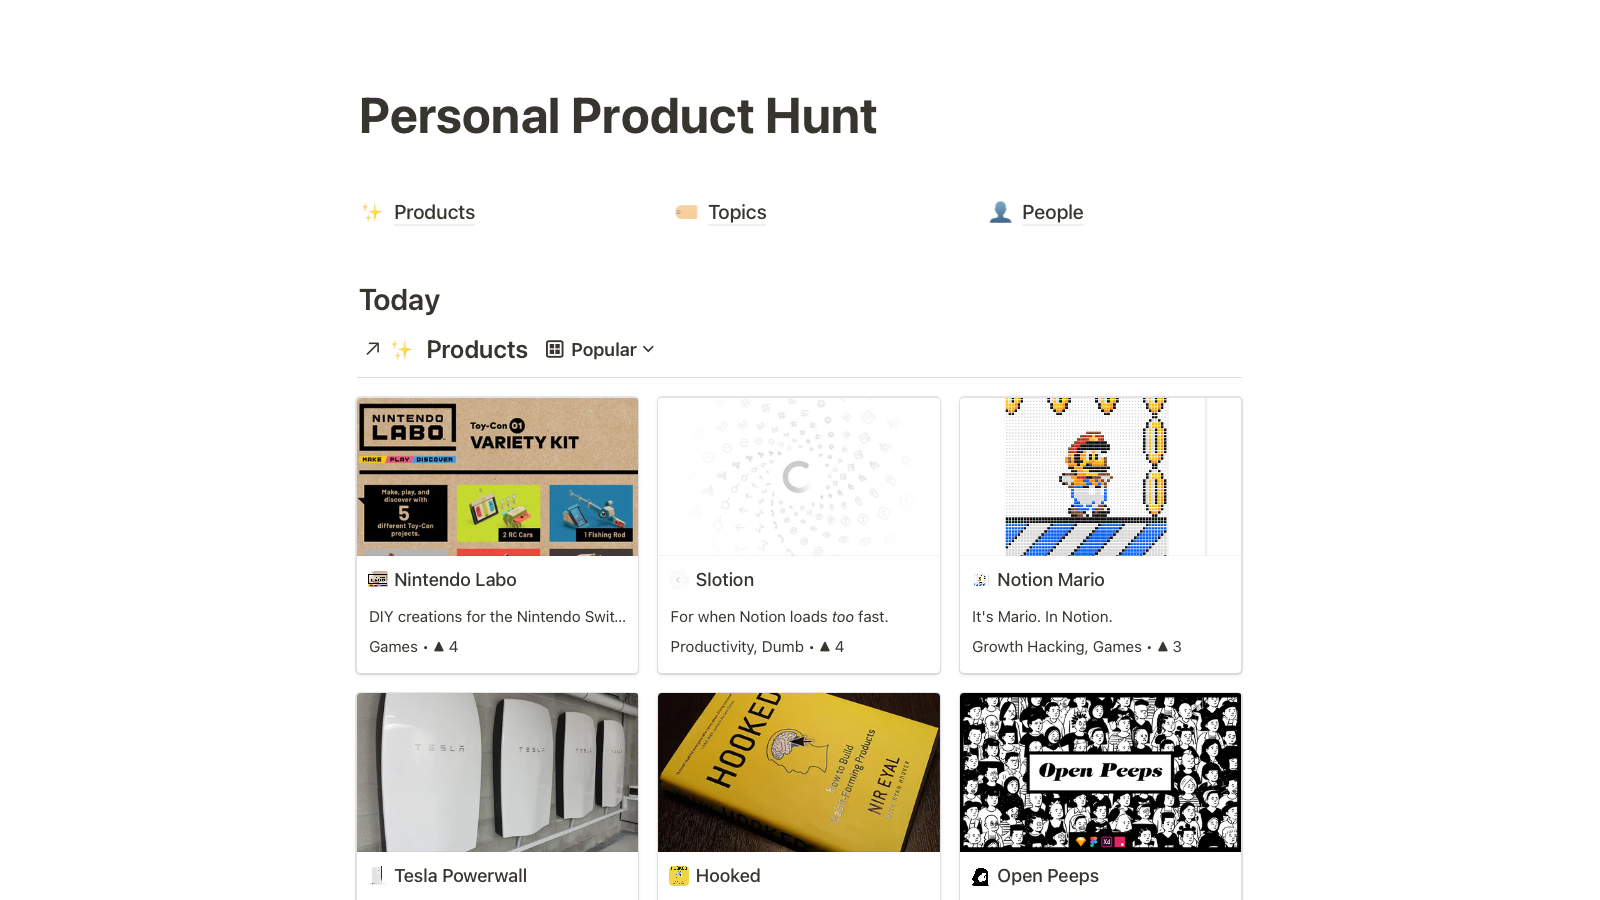 Personal Product Hunt